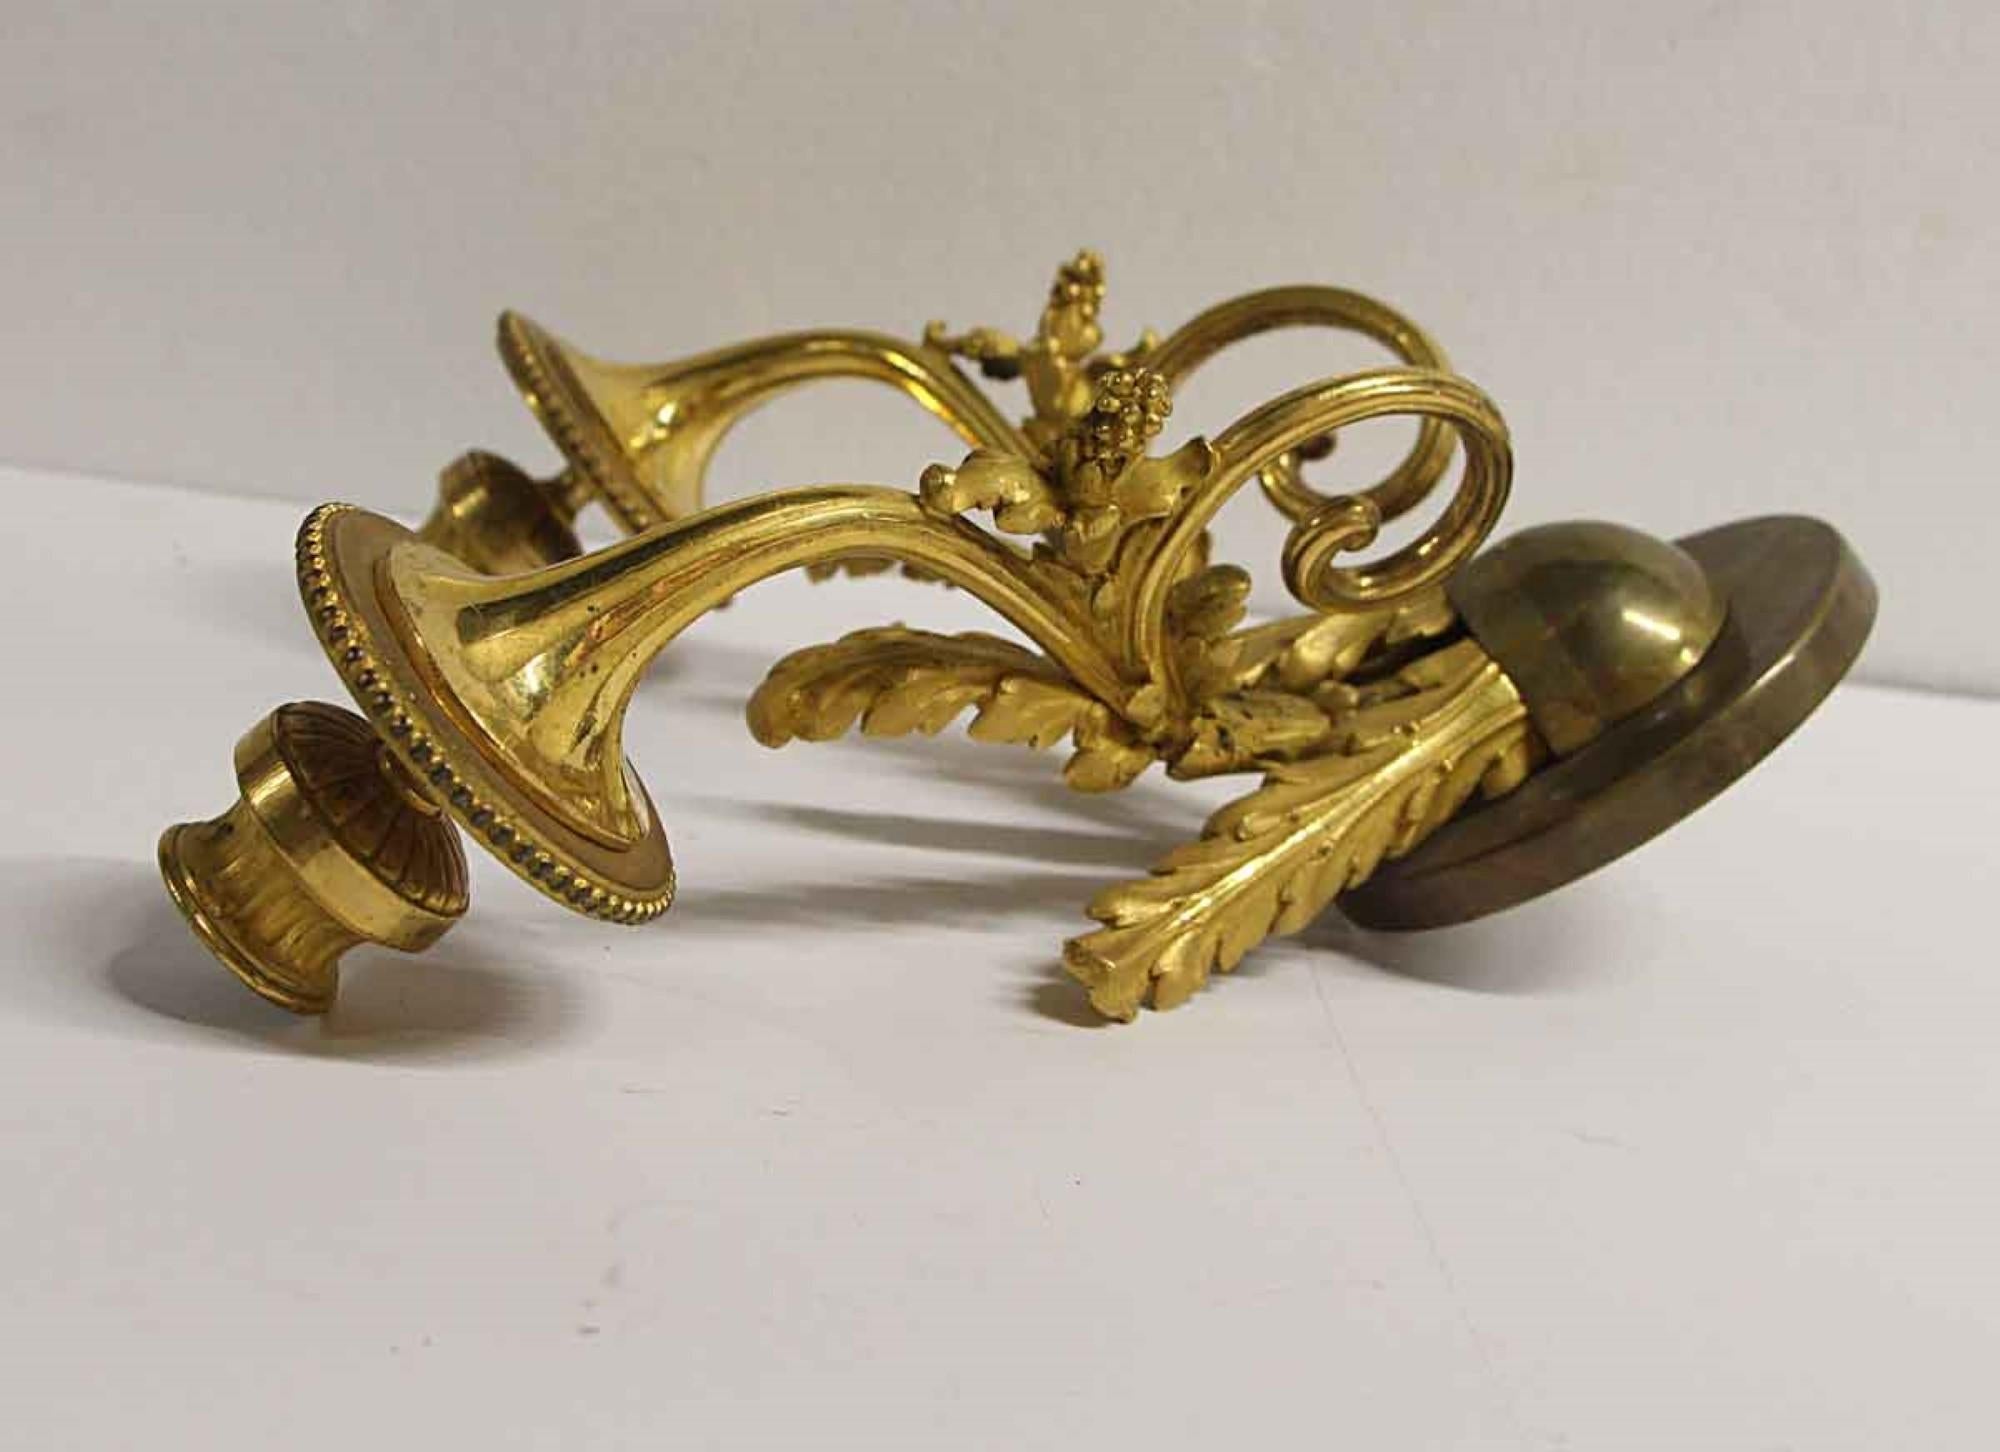 1910s French Empire Wall Cast Brass with Gold Filigree, Quantity Available 4